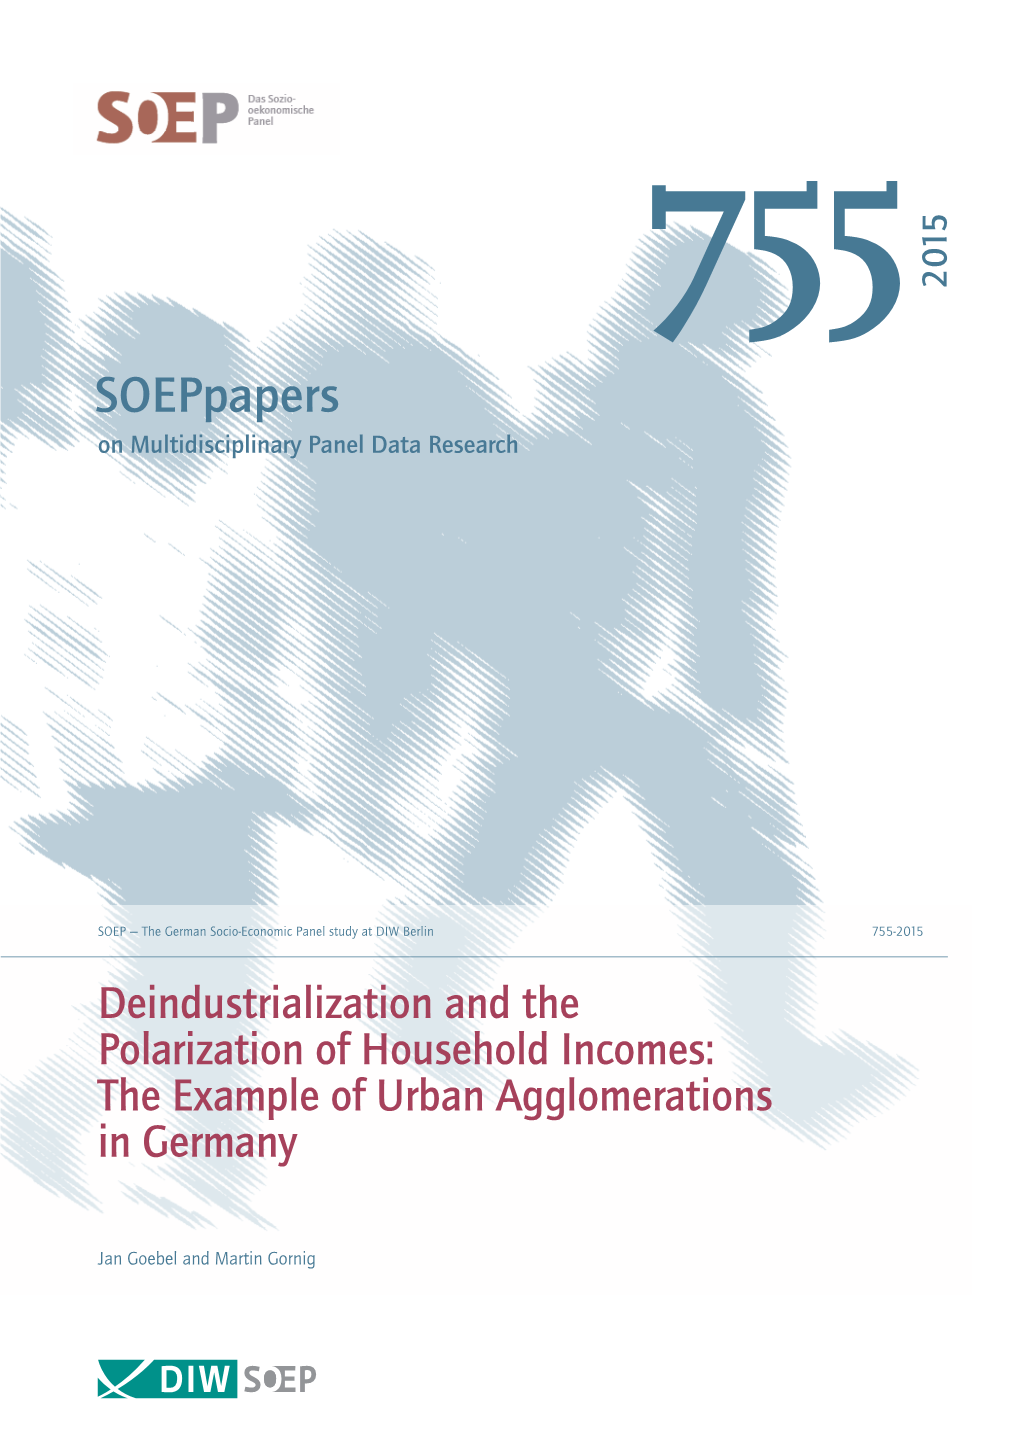 Deindustrialization and the Polarization of Household Incomes: the Example of Urban Agglomerations in Germany